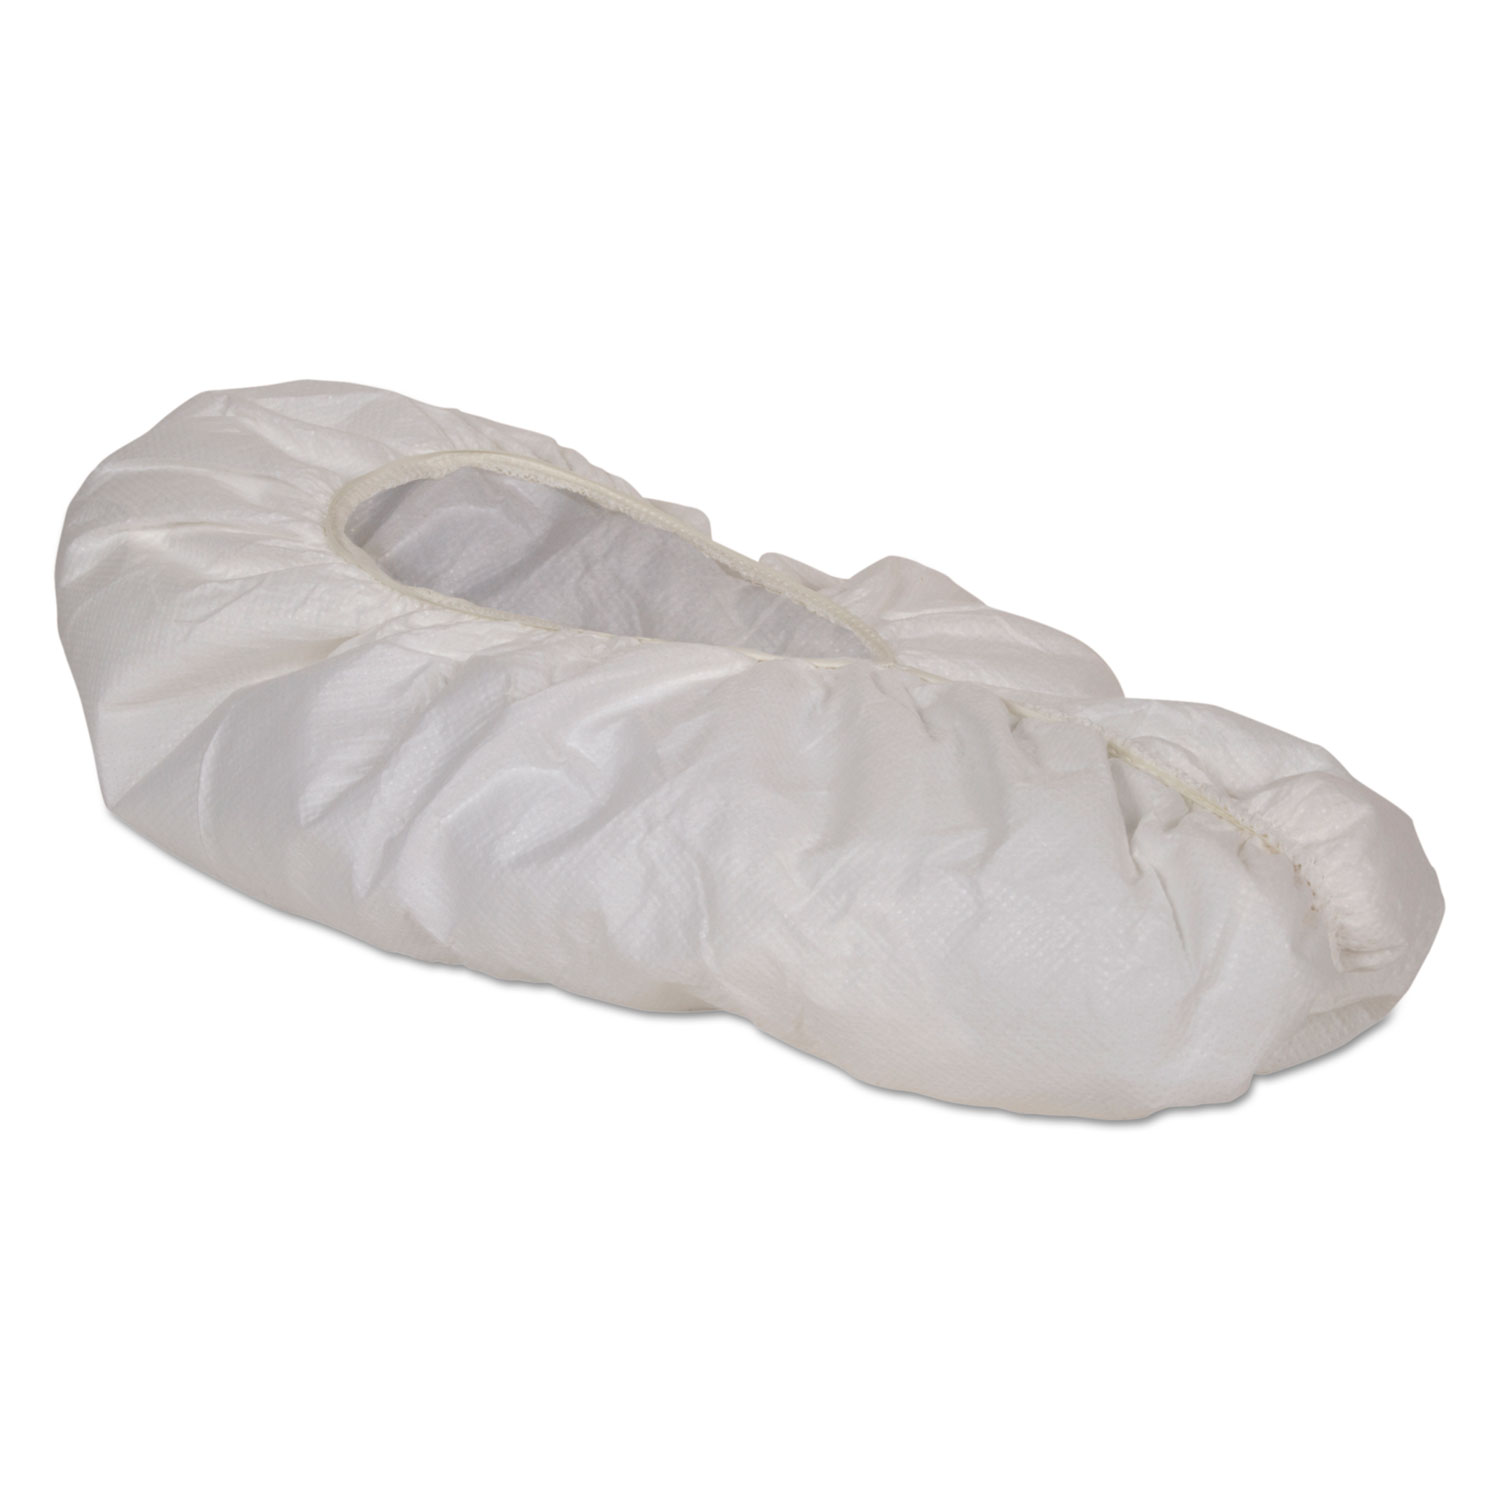  KleenGuard KCC 44490 A40 Shoe Covers, One Size Fits All, White, 400/Carton (KCC44490) 